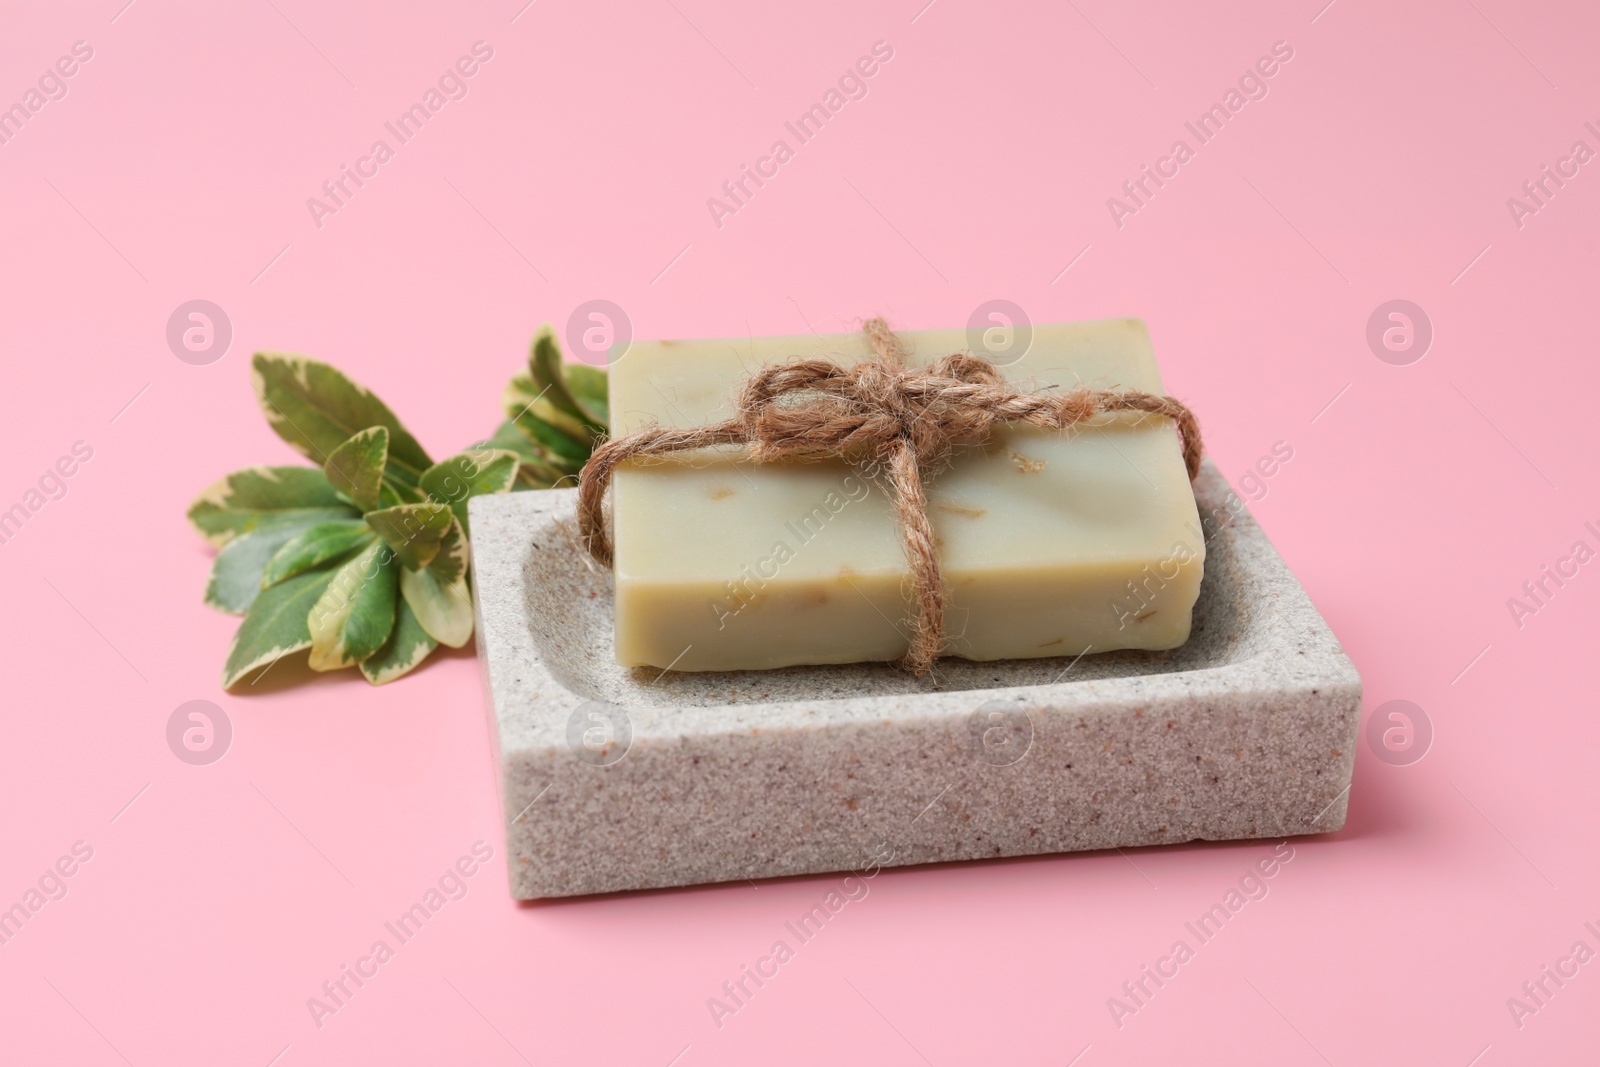 Photo of Dish with soap bar and plant branch on pink background